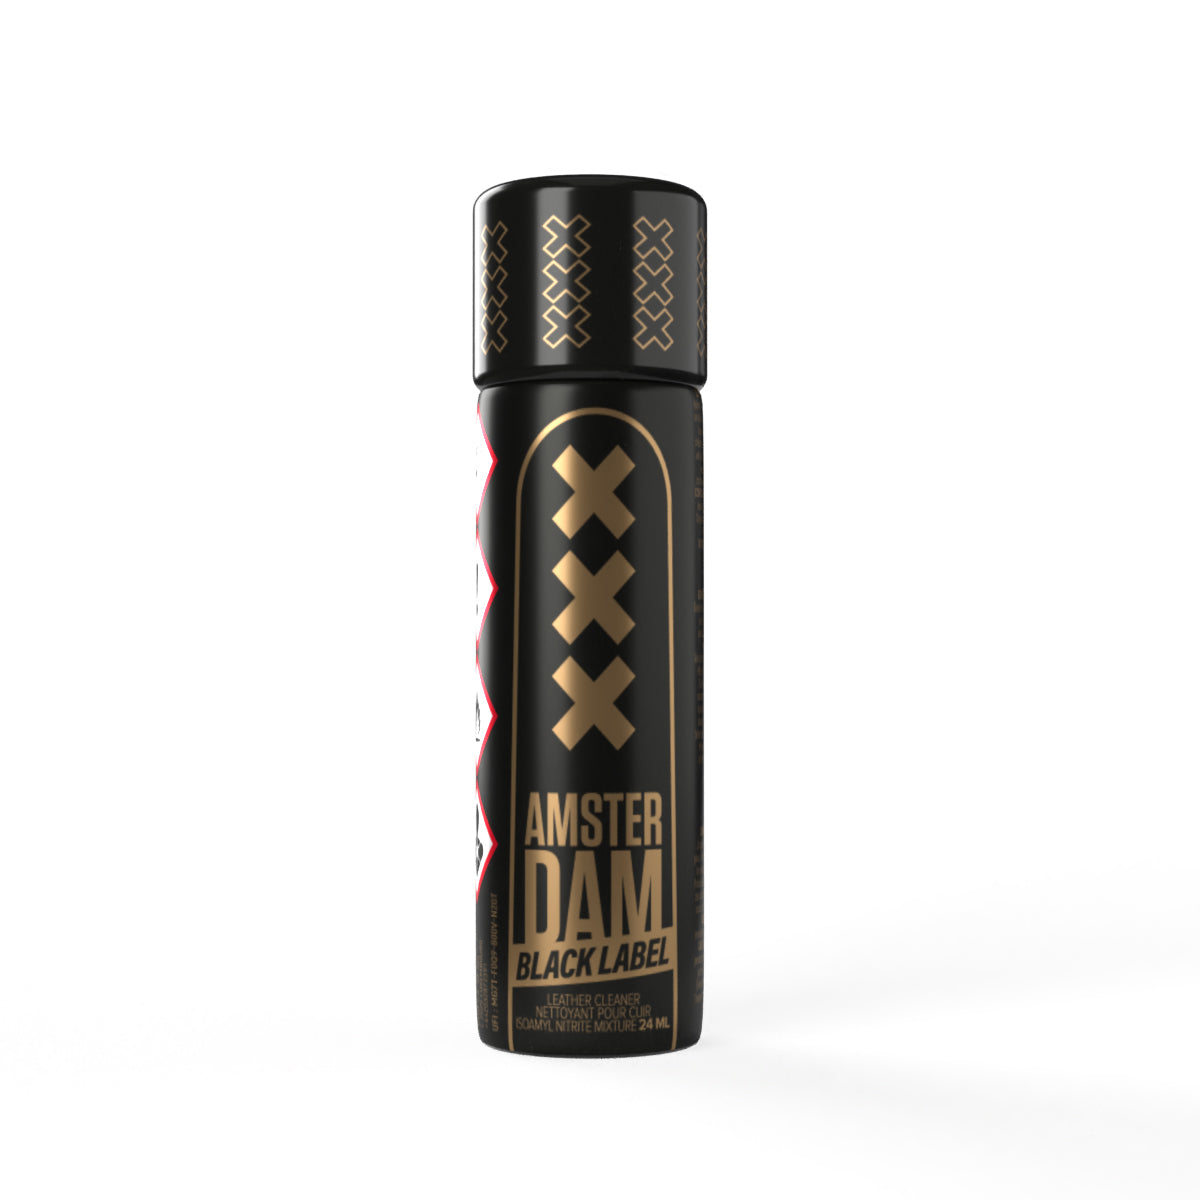 A product photo of a bottle of Amsterdam Amyl Slim Poppers.